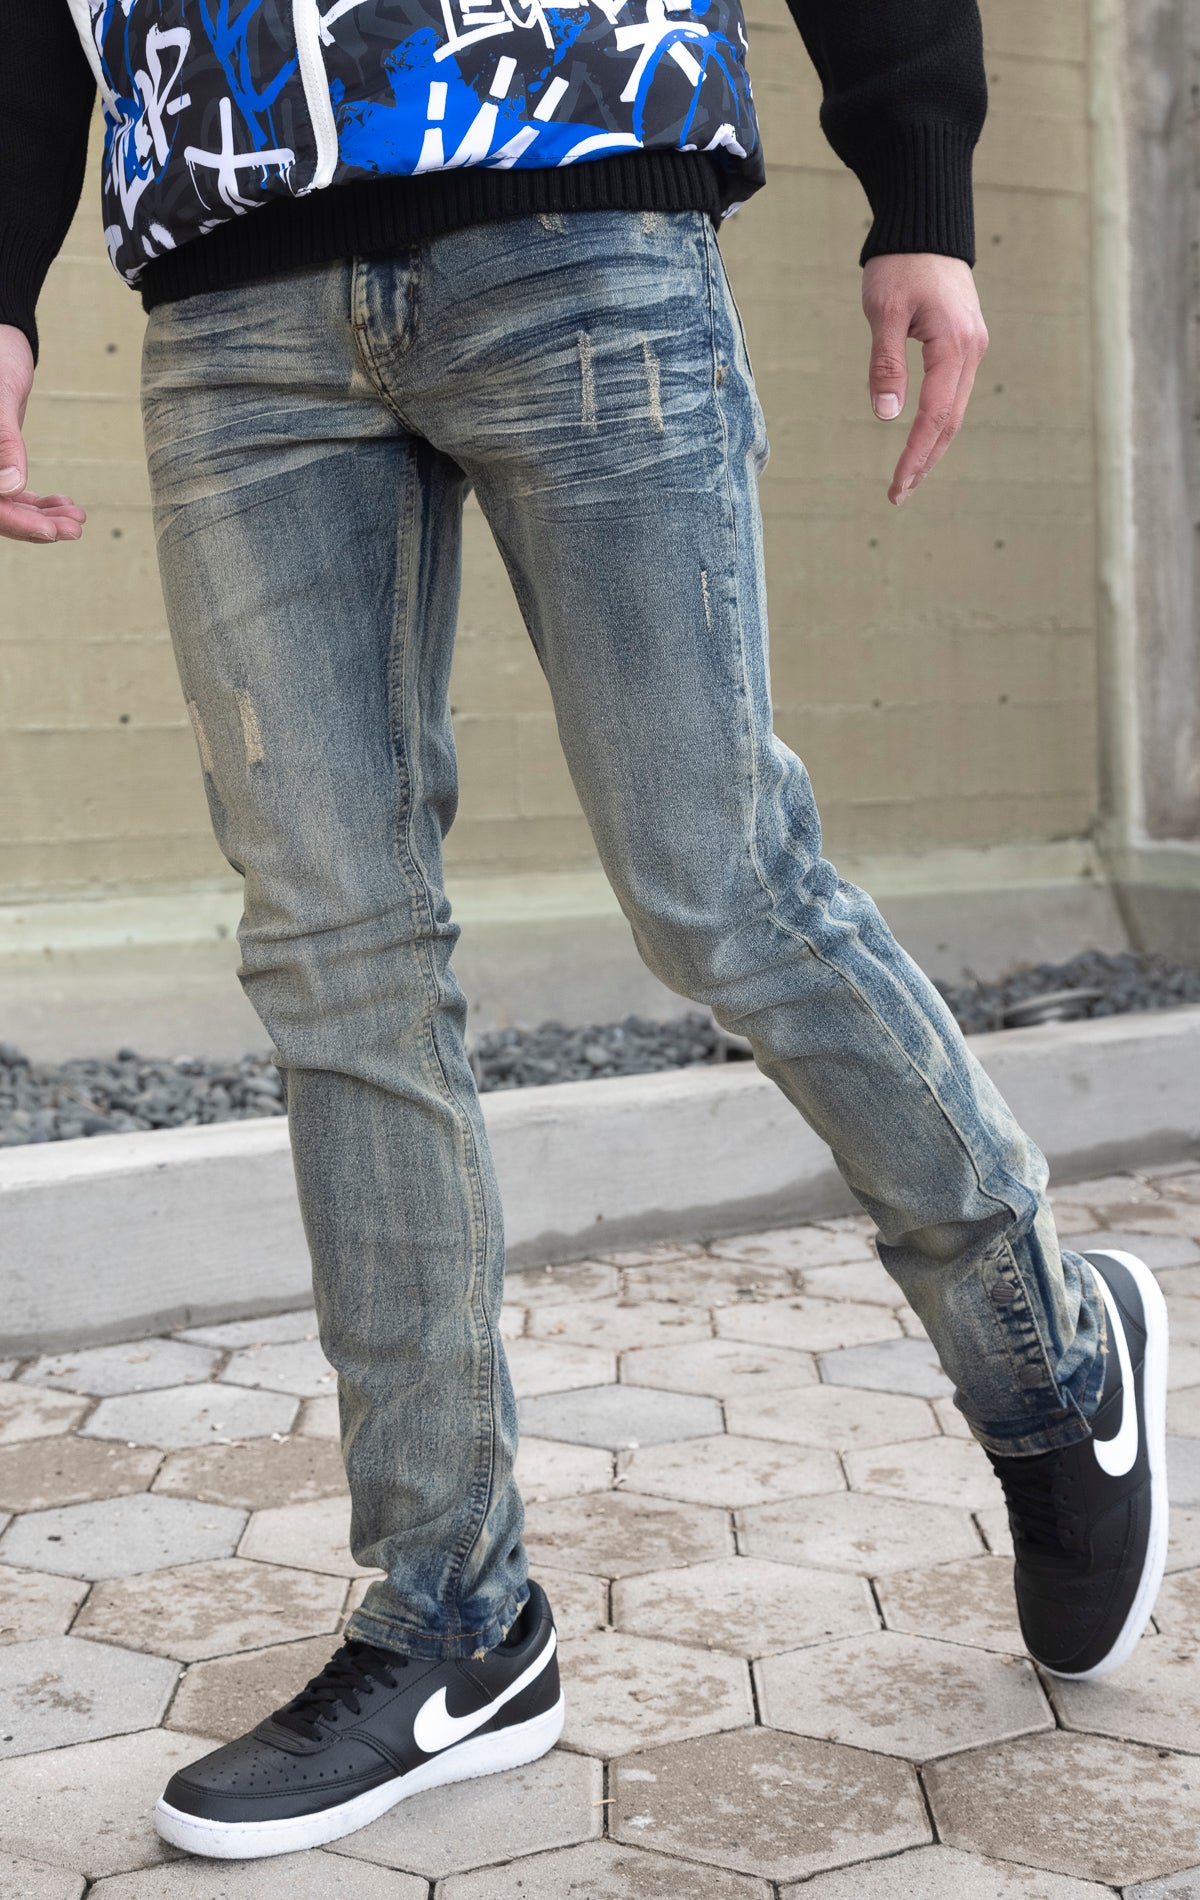 Light tint denim featuring distressed detailing throughout, a skinny fit, stretch denim, and a buttoned flare.